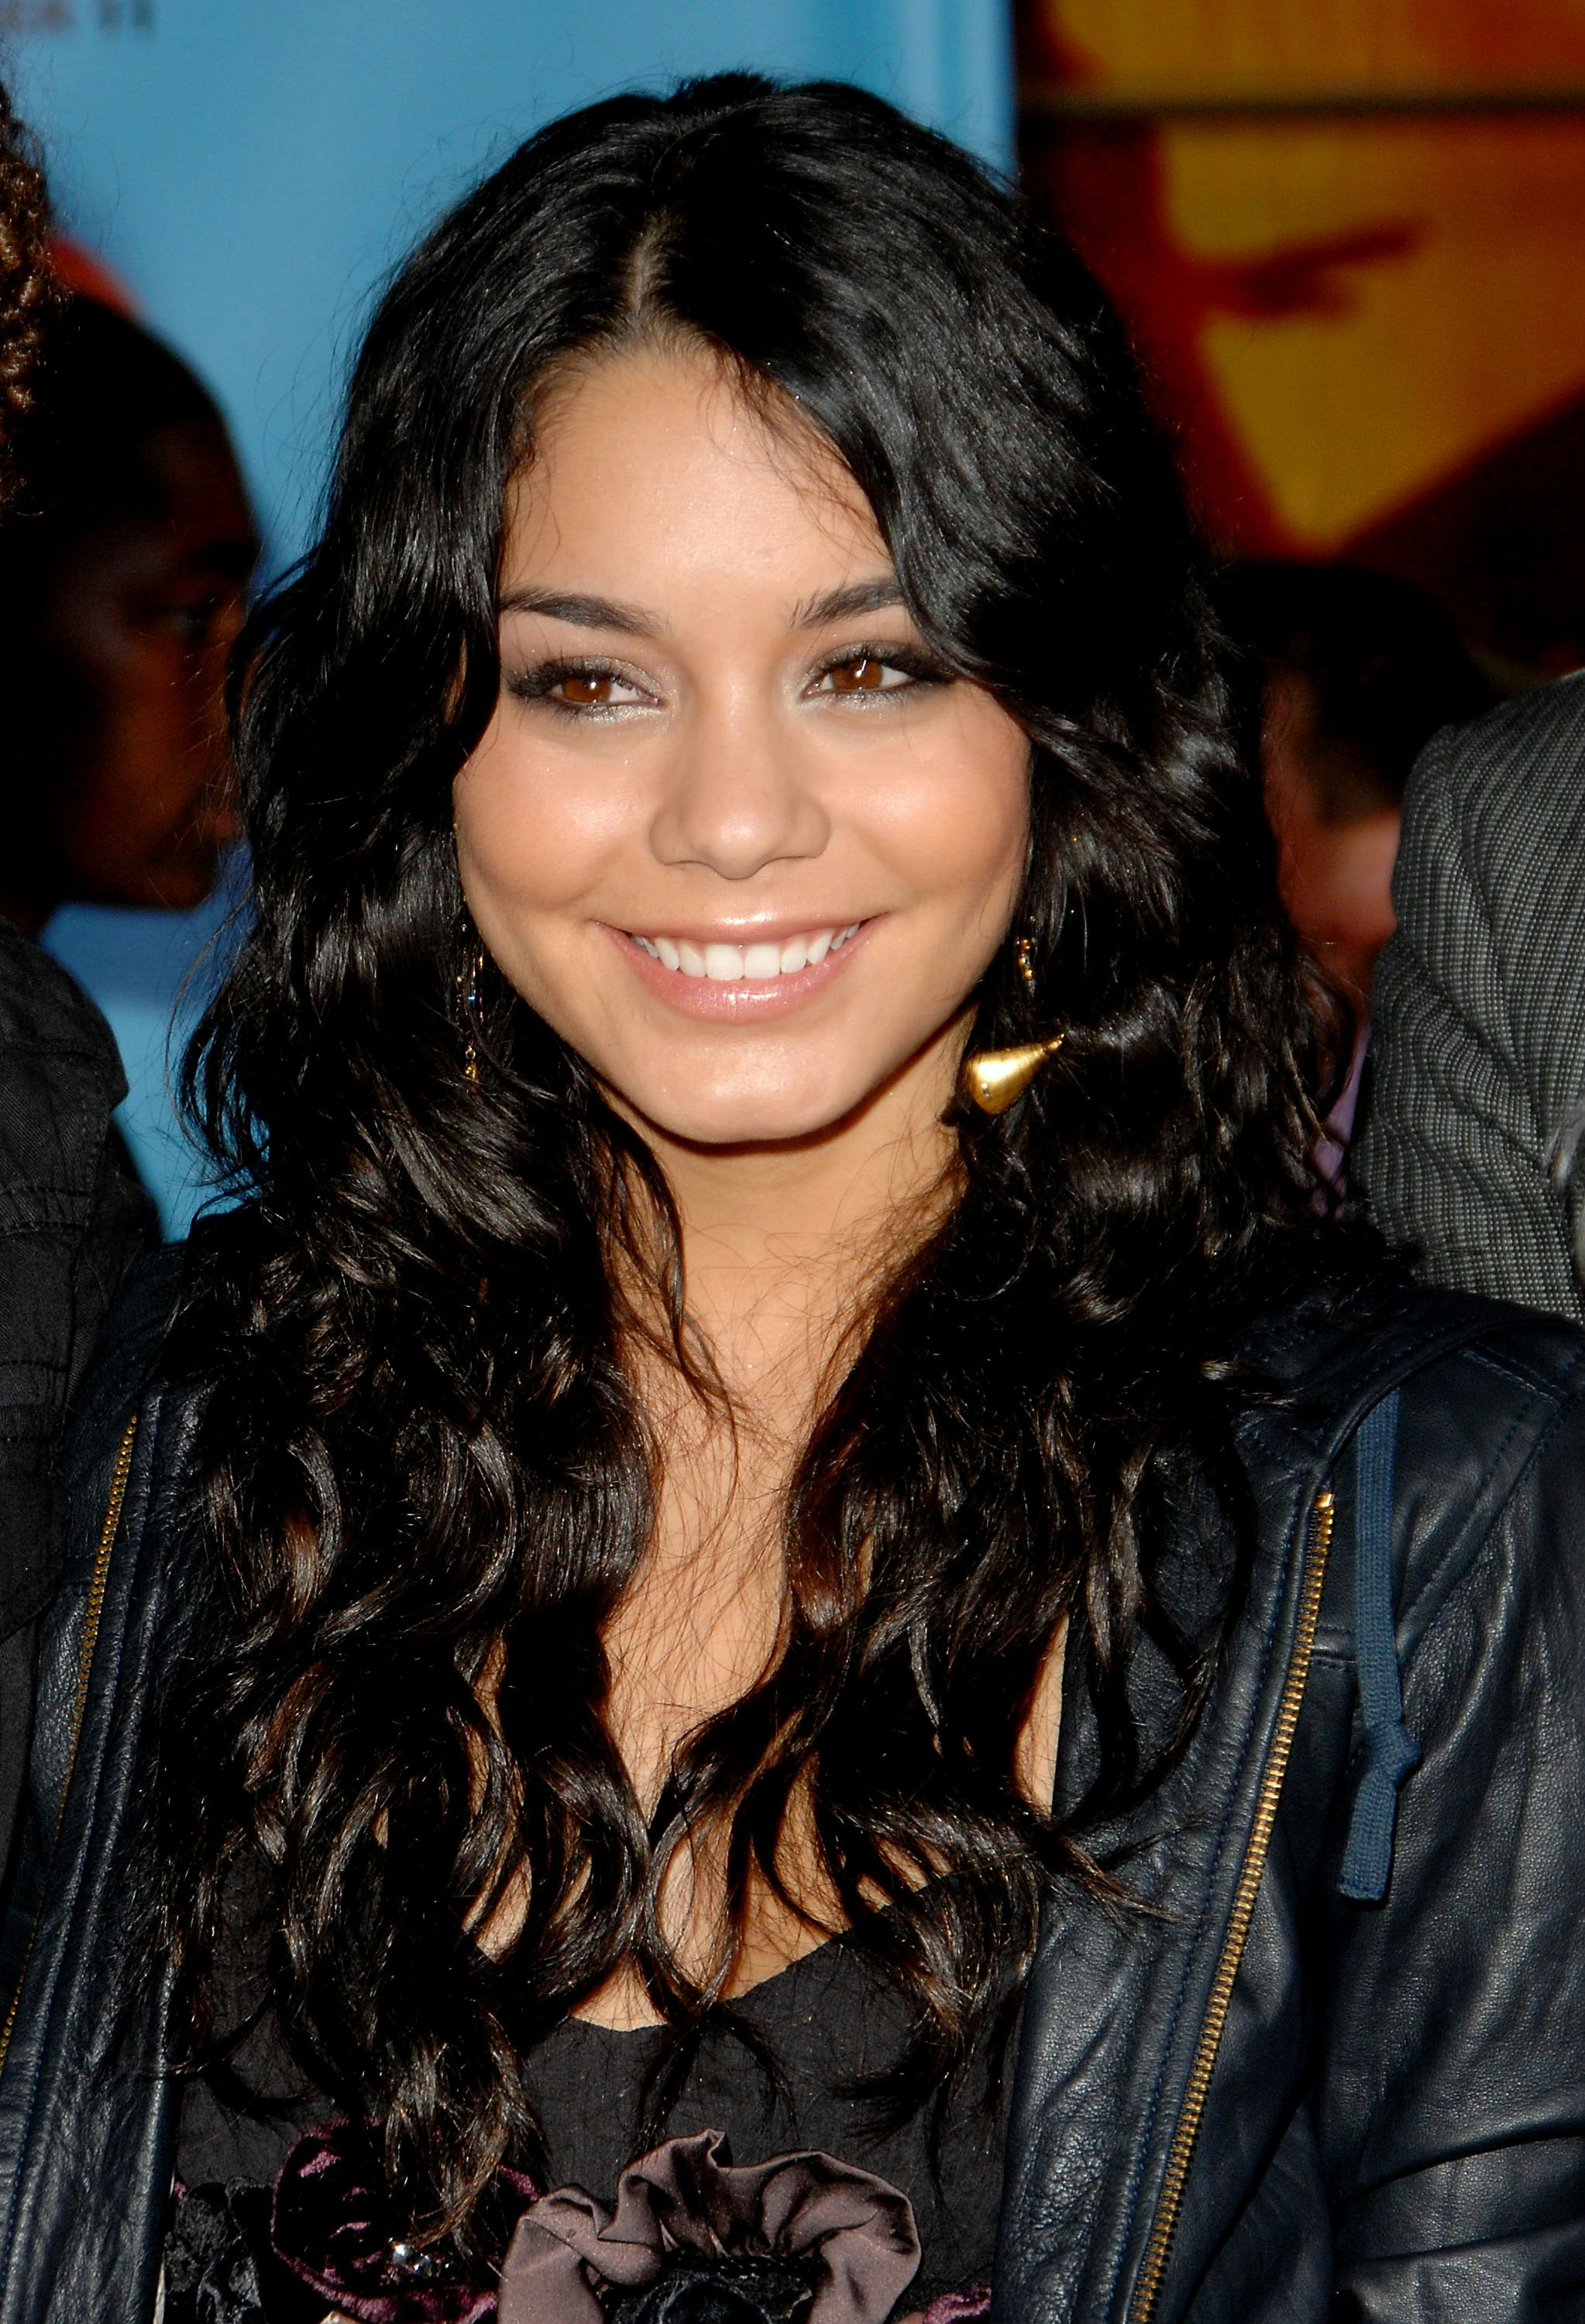 Vanessa Hudgens’ Comments On Her Nude Photo Leak Hold